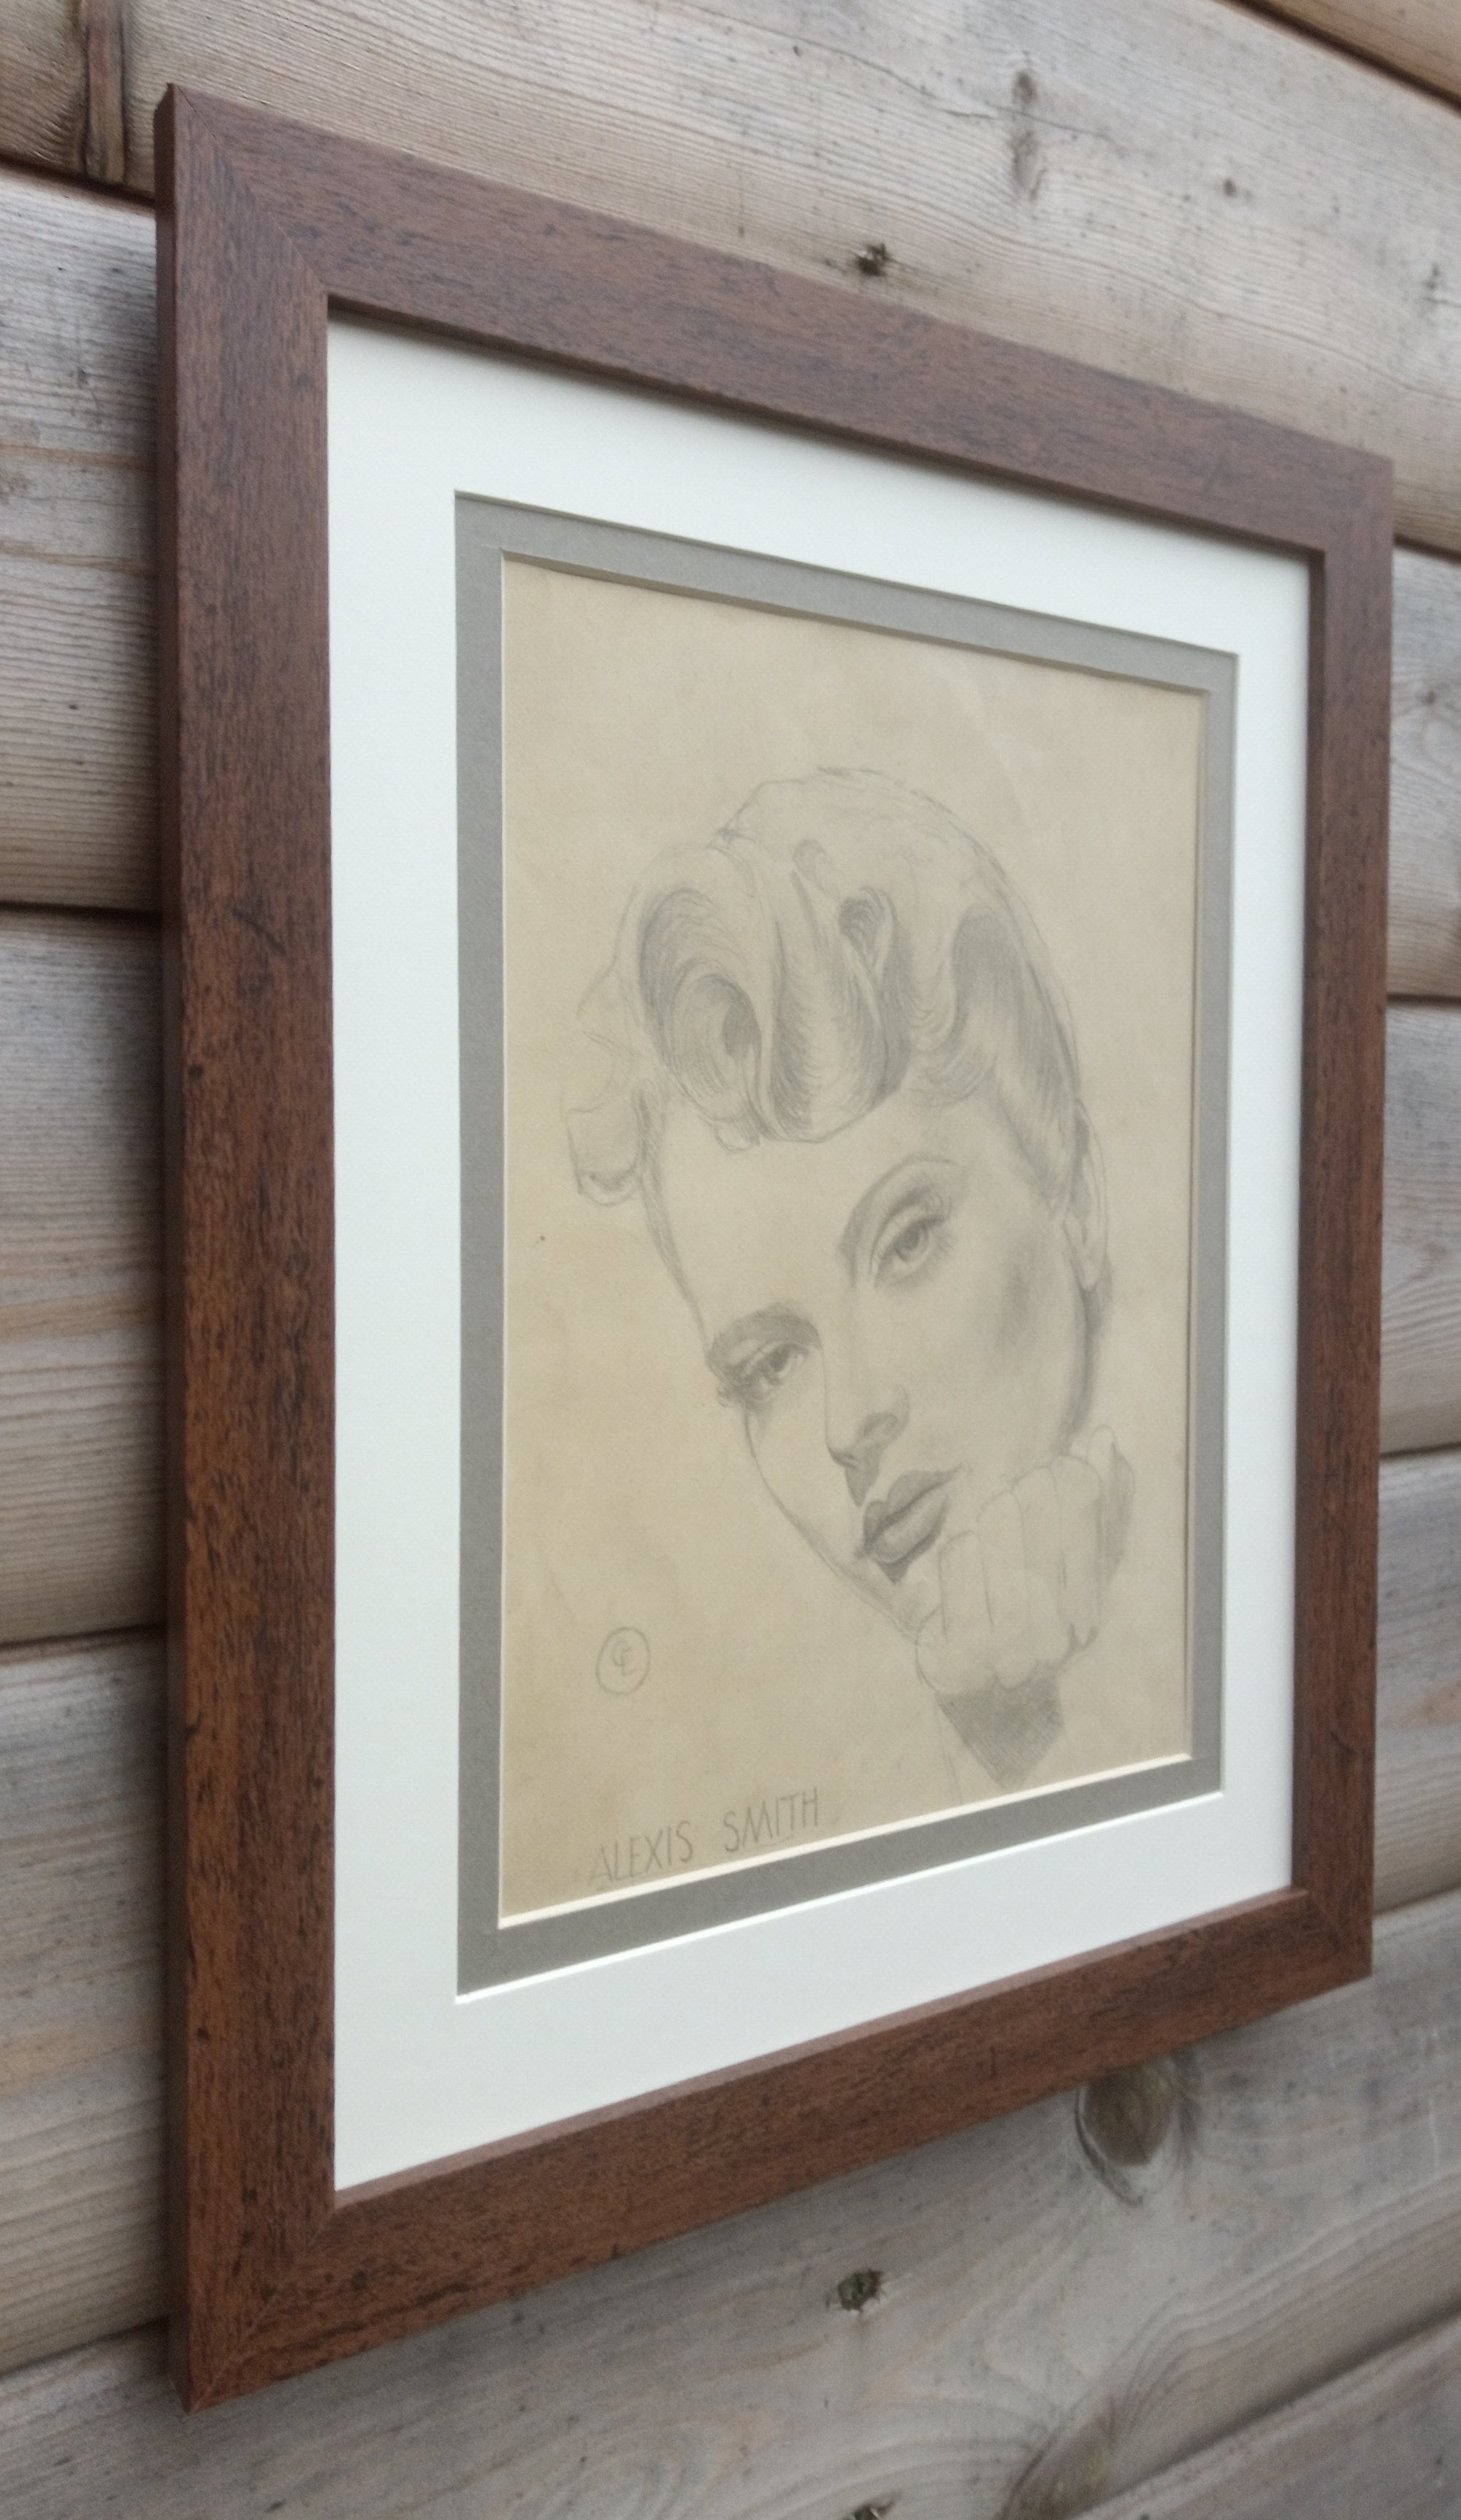 Pencil Drawing of Alexis Smith (1950's) Framed, Signed Original